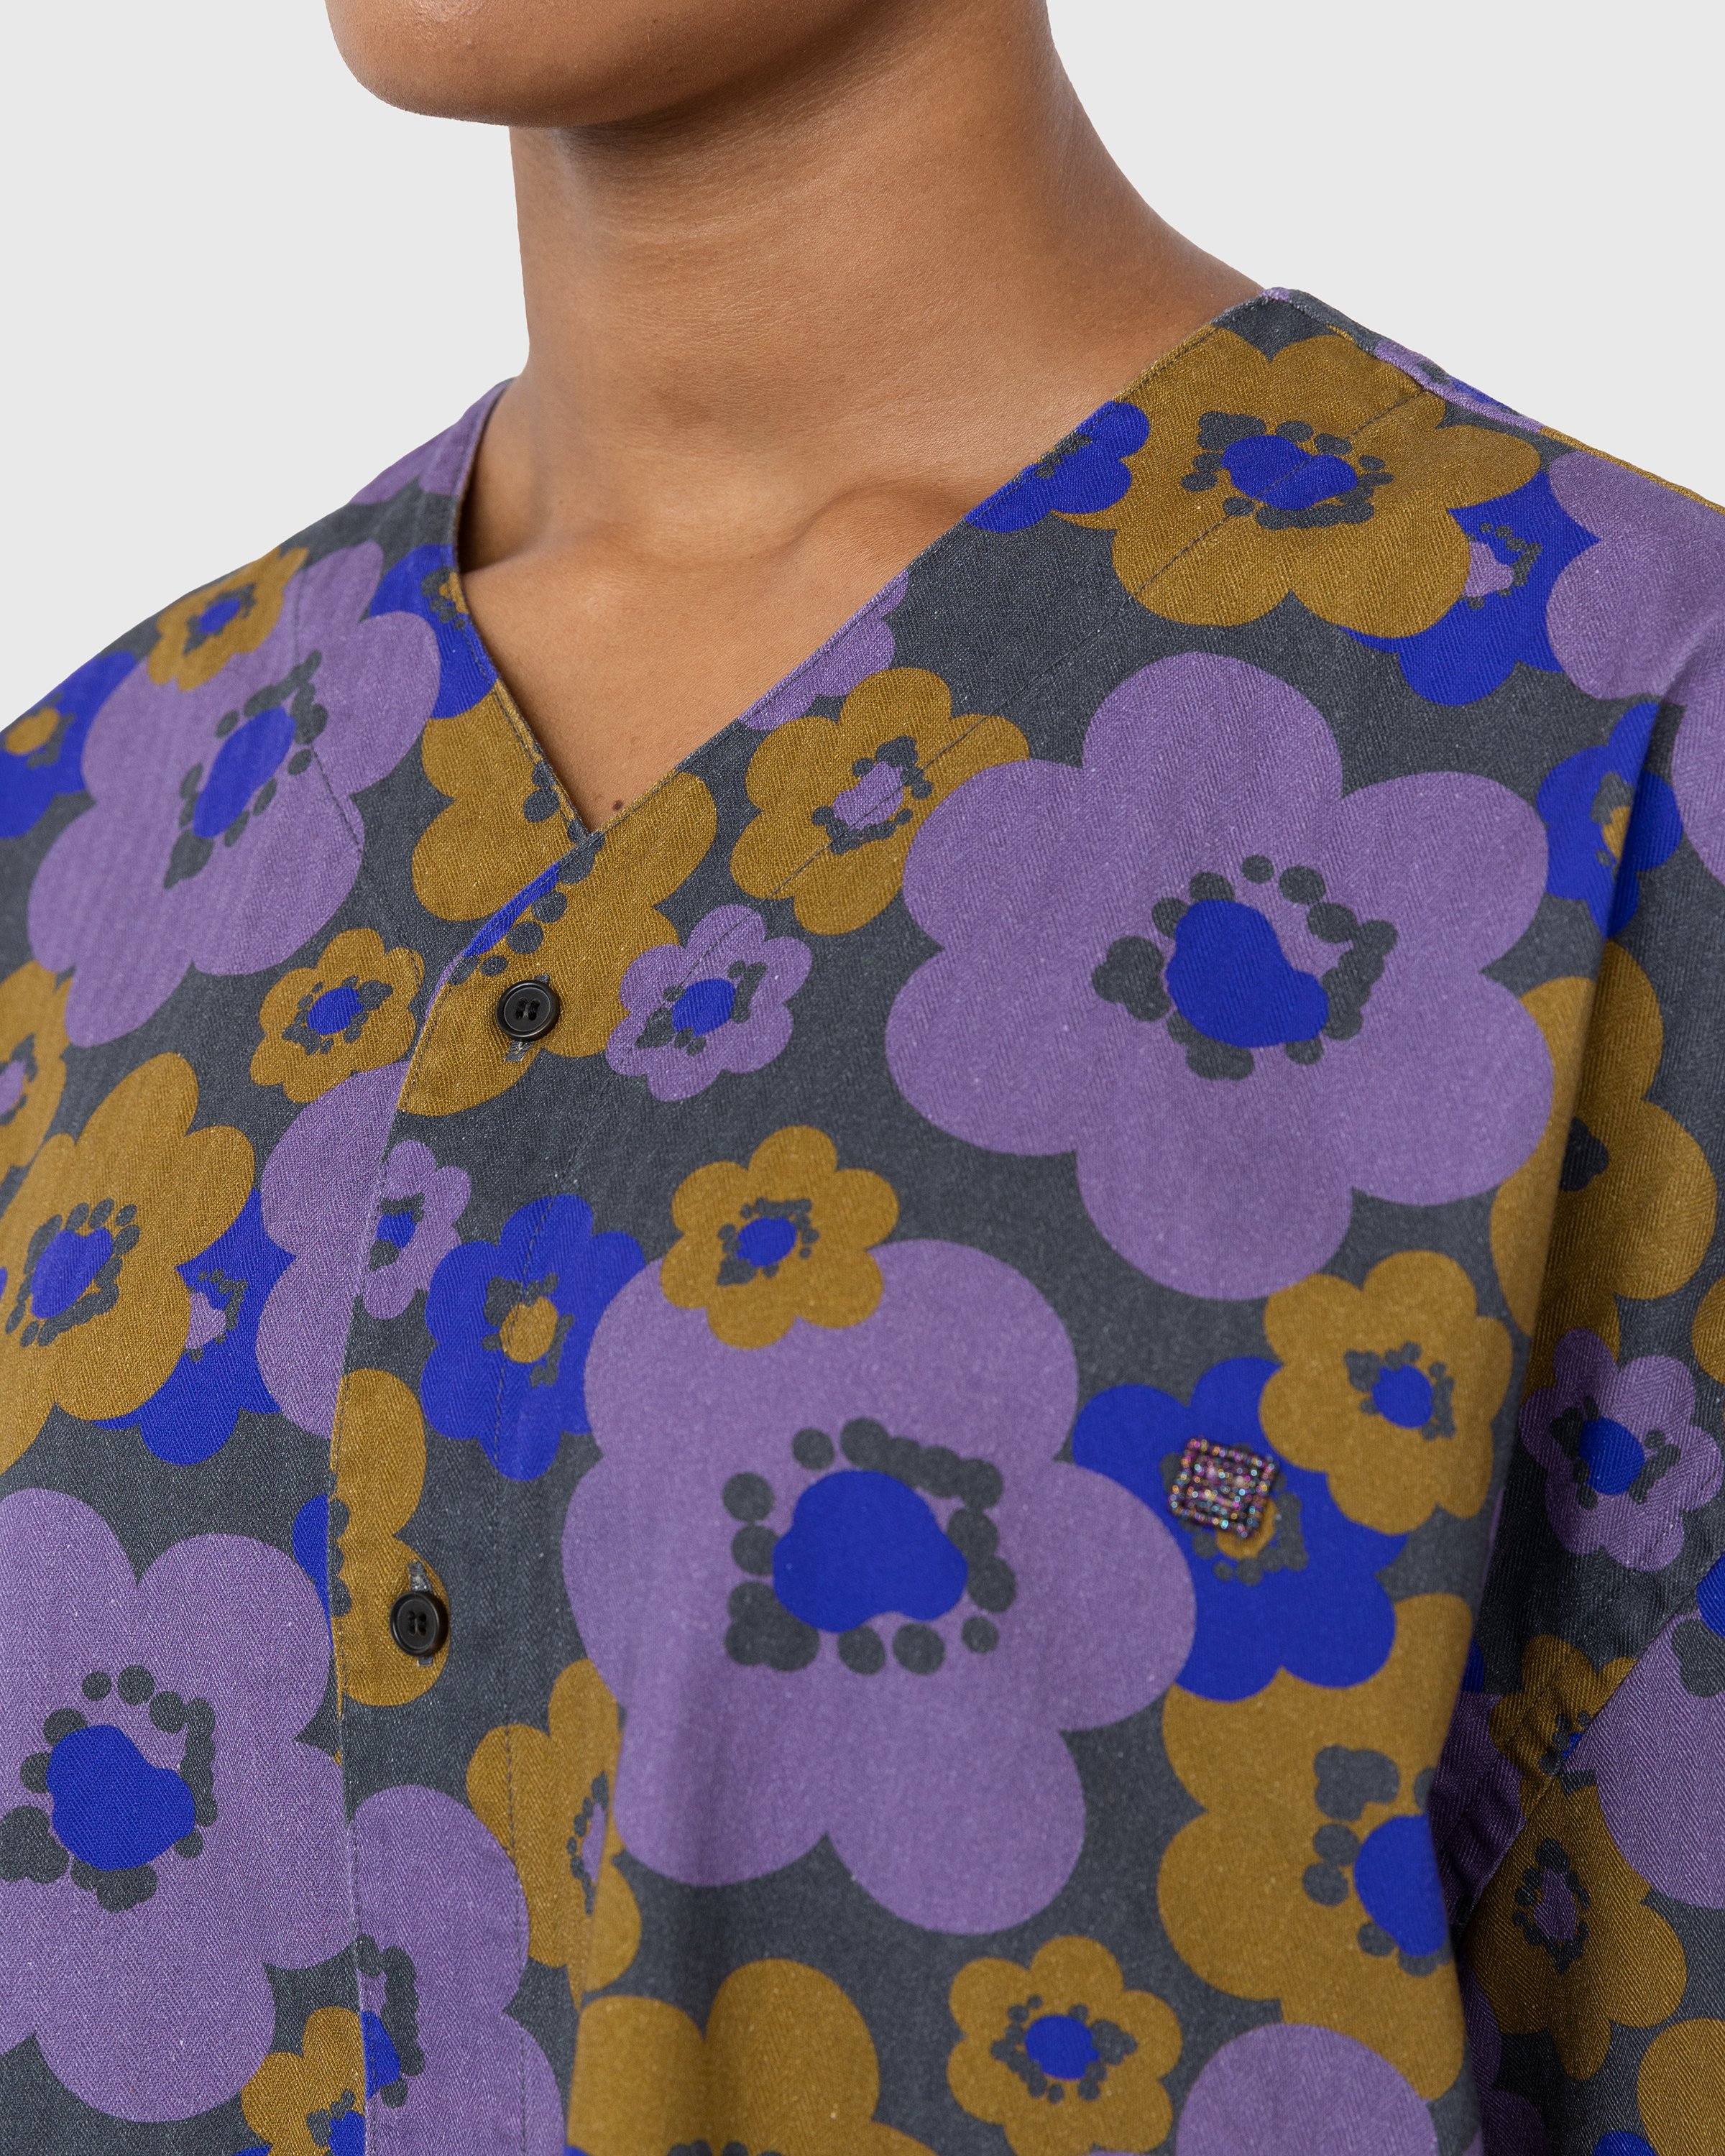 Acne Studios - Floral Short-Sleeve Button-Up Purple/Brown - Clothing - Multi - Image 5